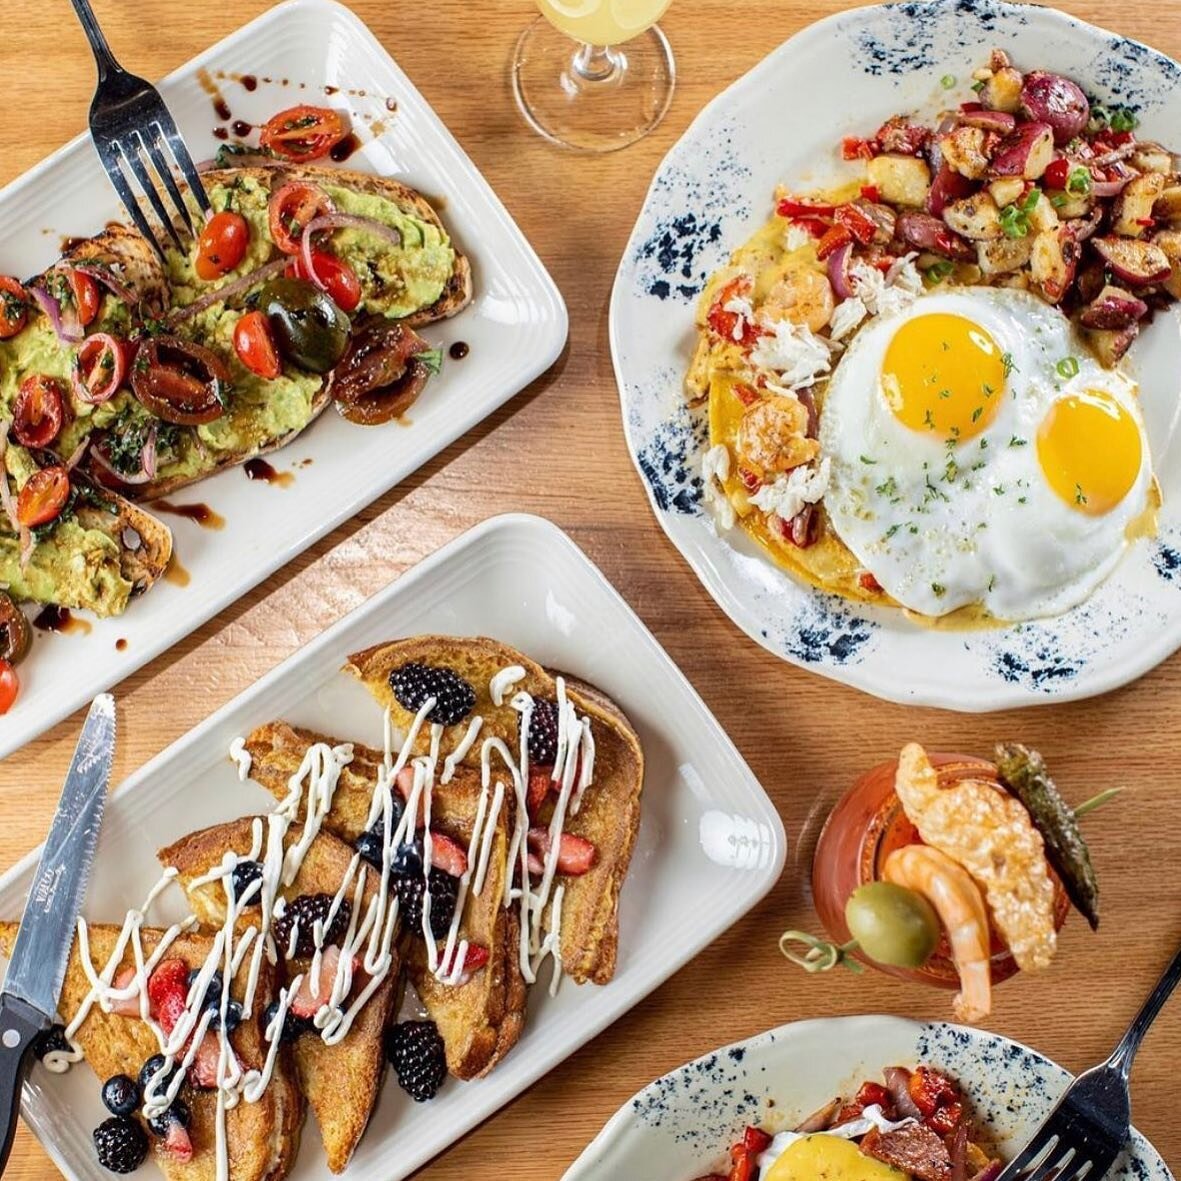 Discover the Best Brunch Near me